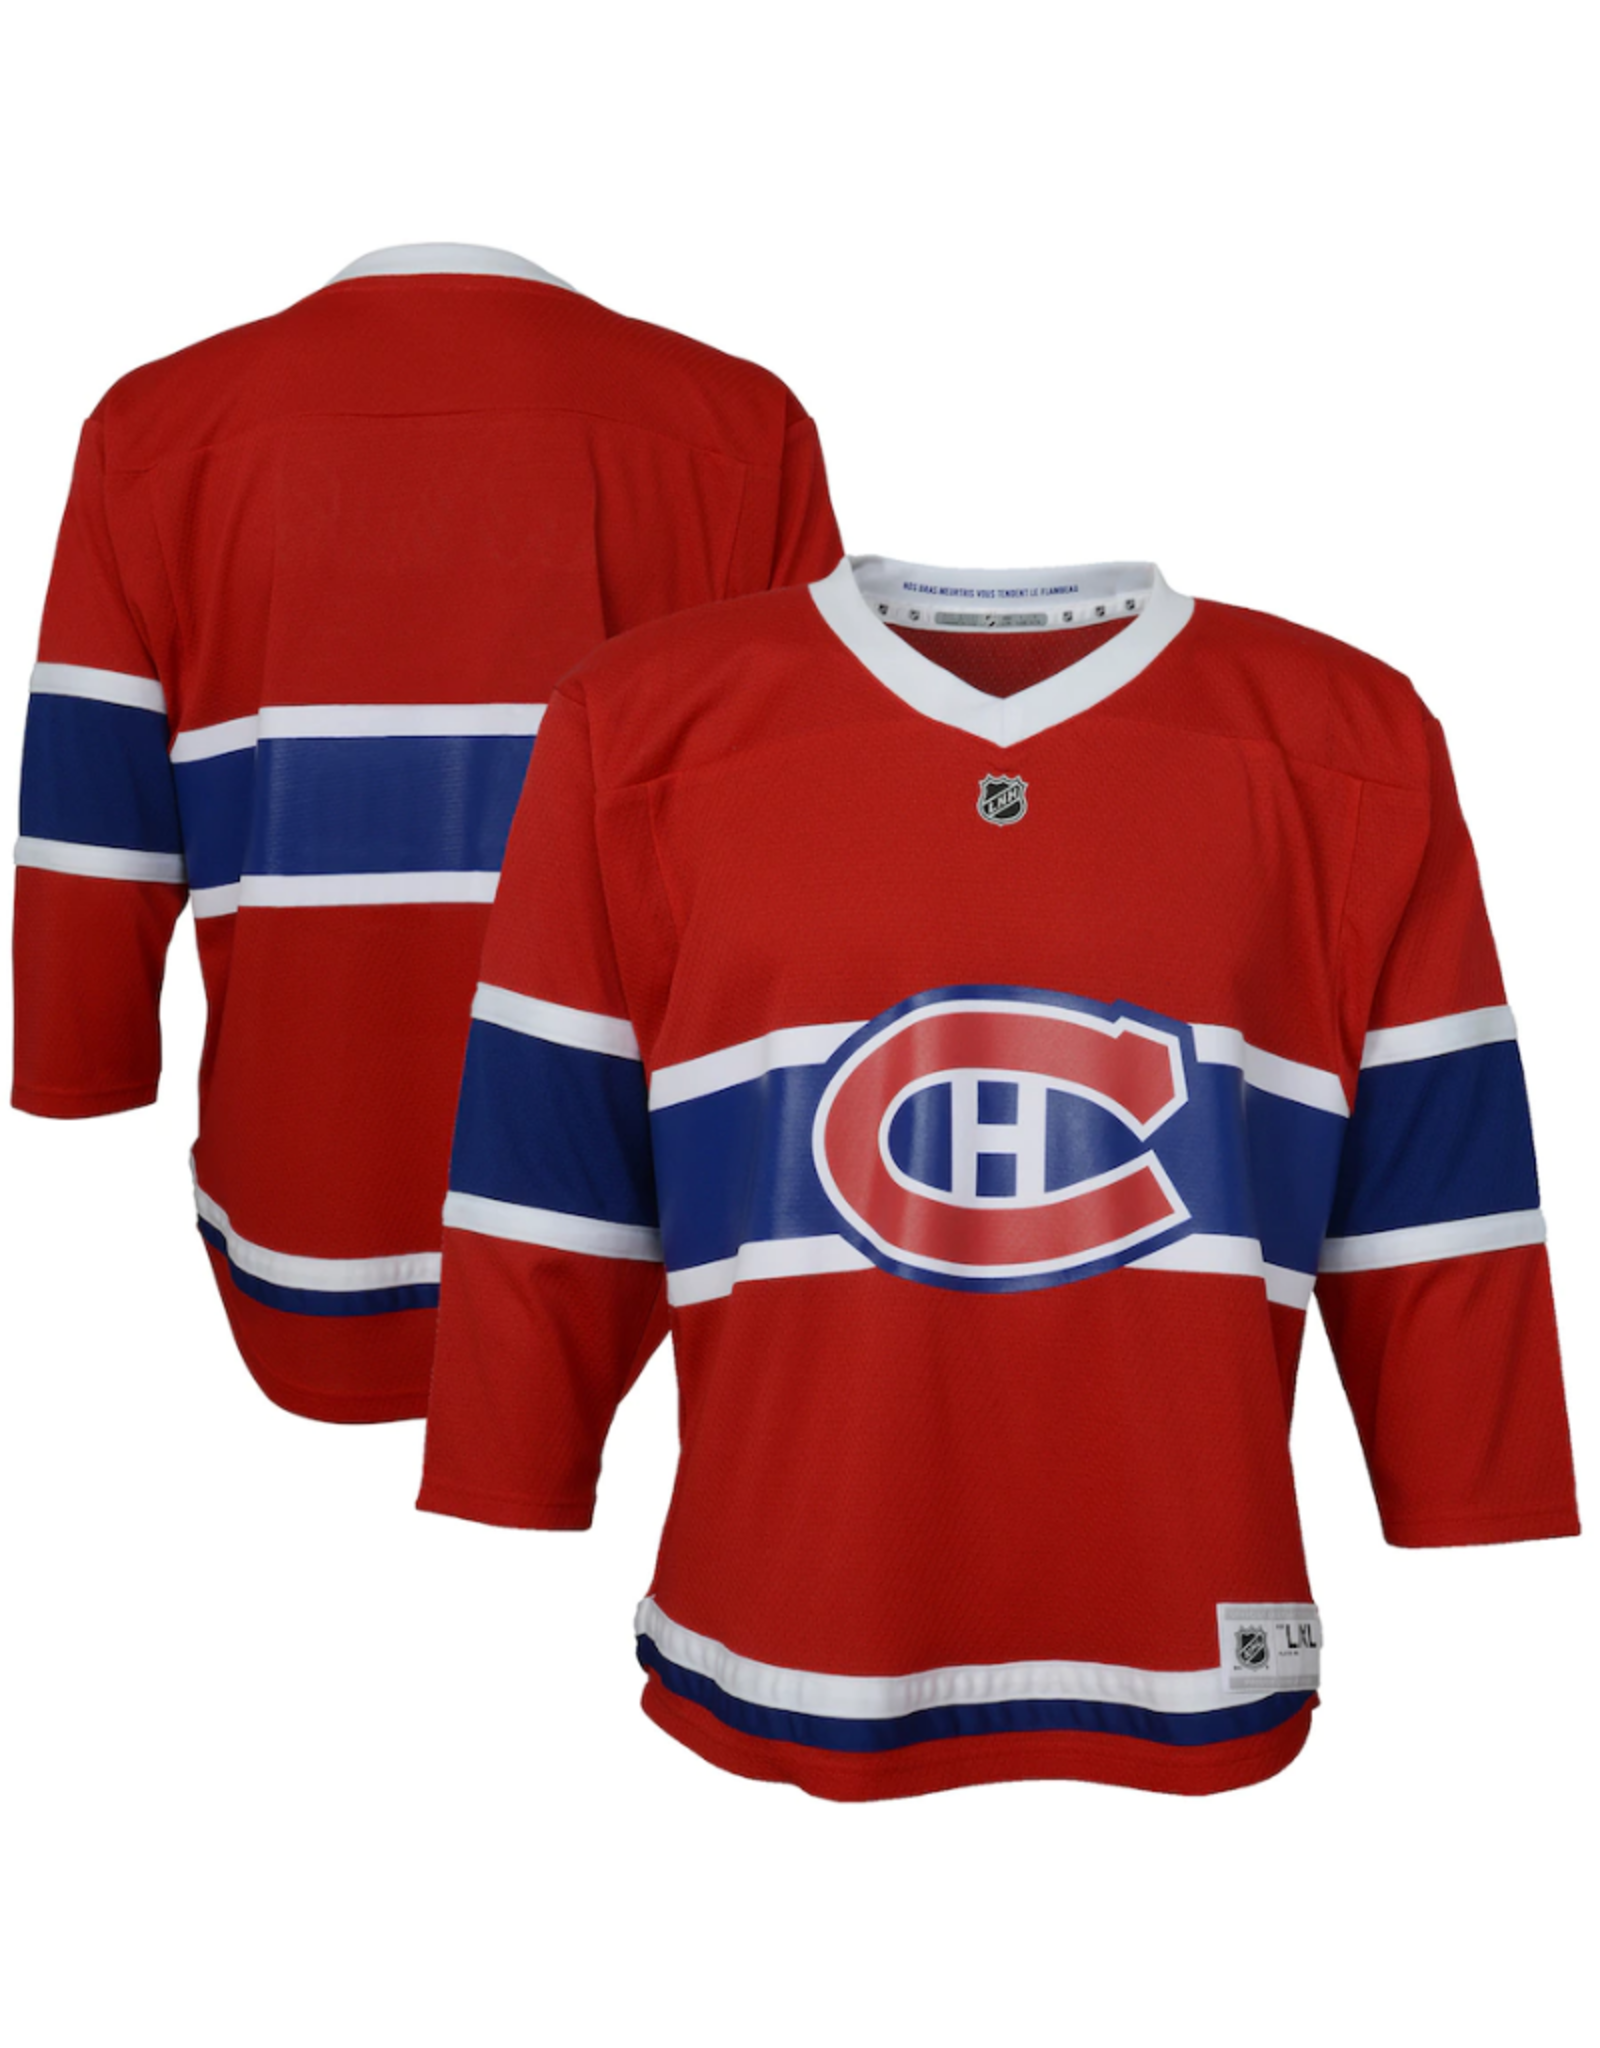 NHL Infant Replica Home Jersey Montreal Canadiens Red